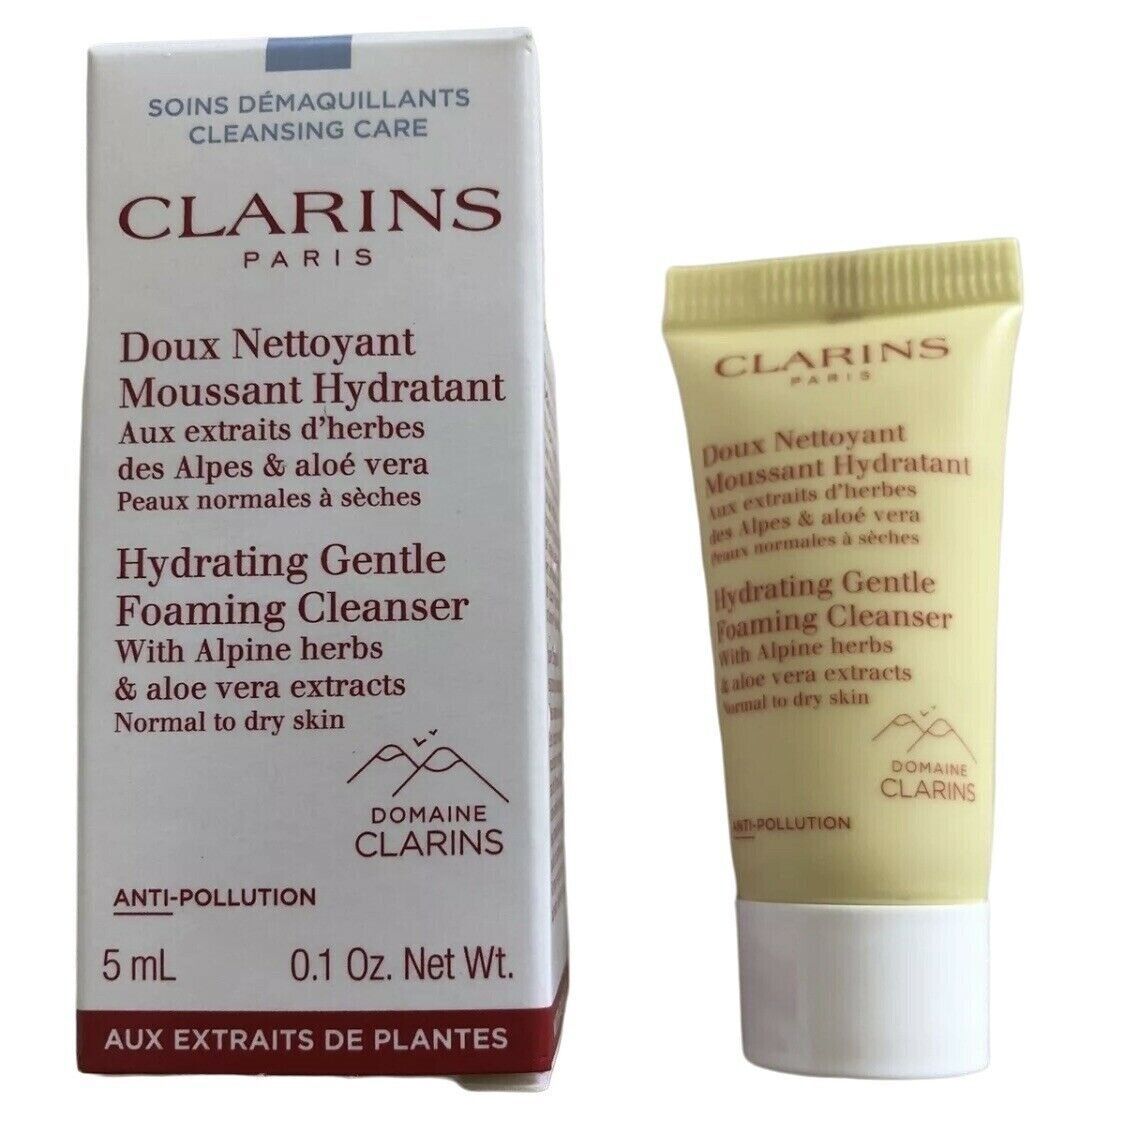 Clarins Hydrating Gentle Foaming Cleanser Alpine and Aloe Vera Extract 0.1oz 5ml - $2.25